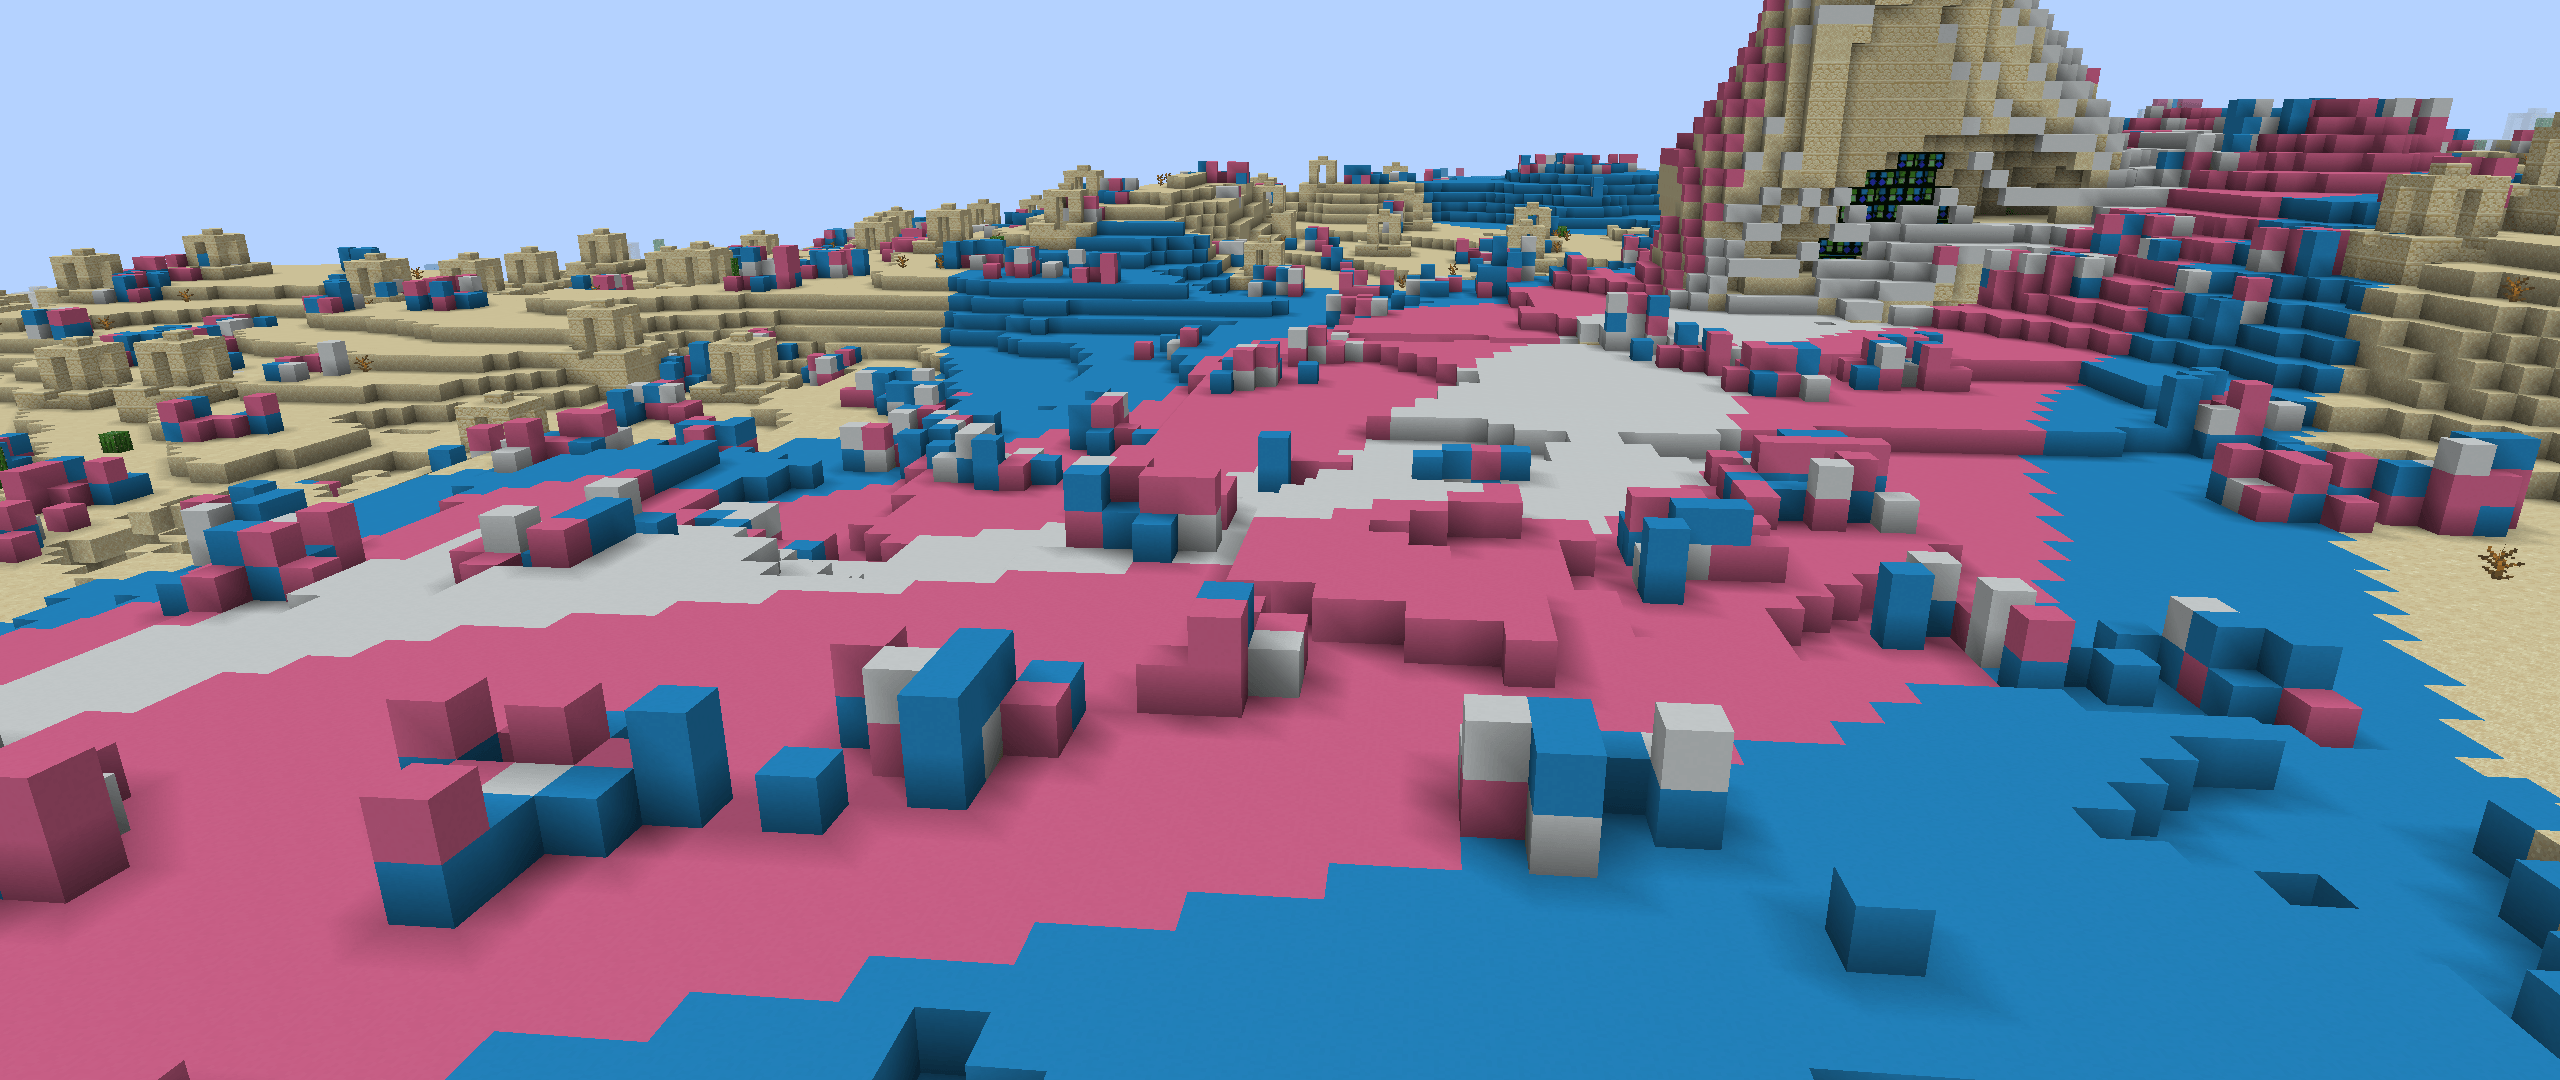 An image of the Minecraft's ground transformed into a gorgeous transgender flag.